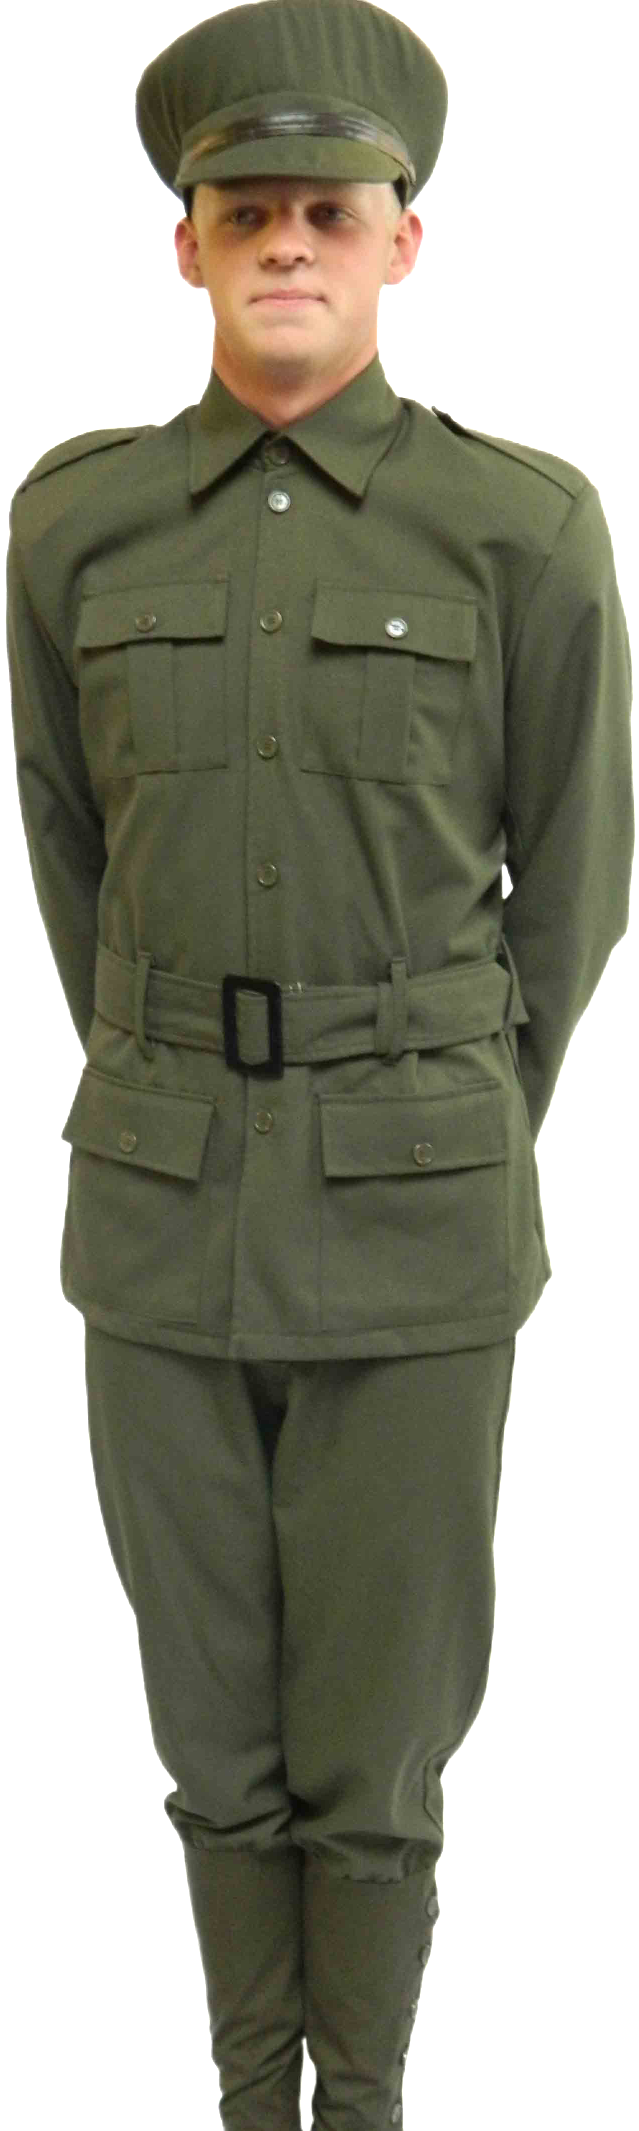 World War One Soldier's costume for hire